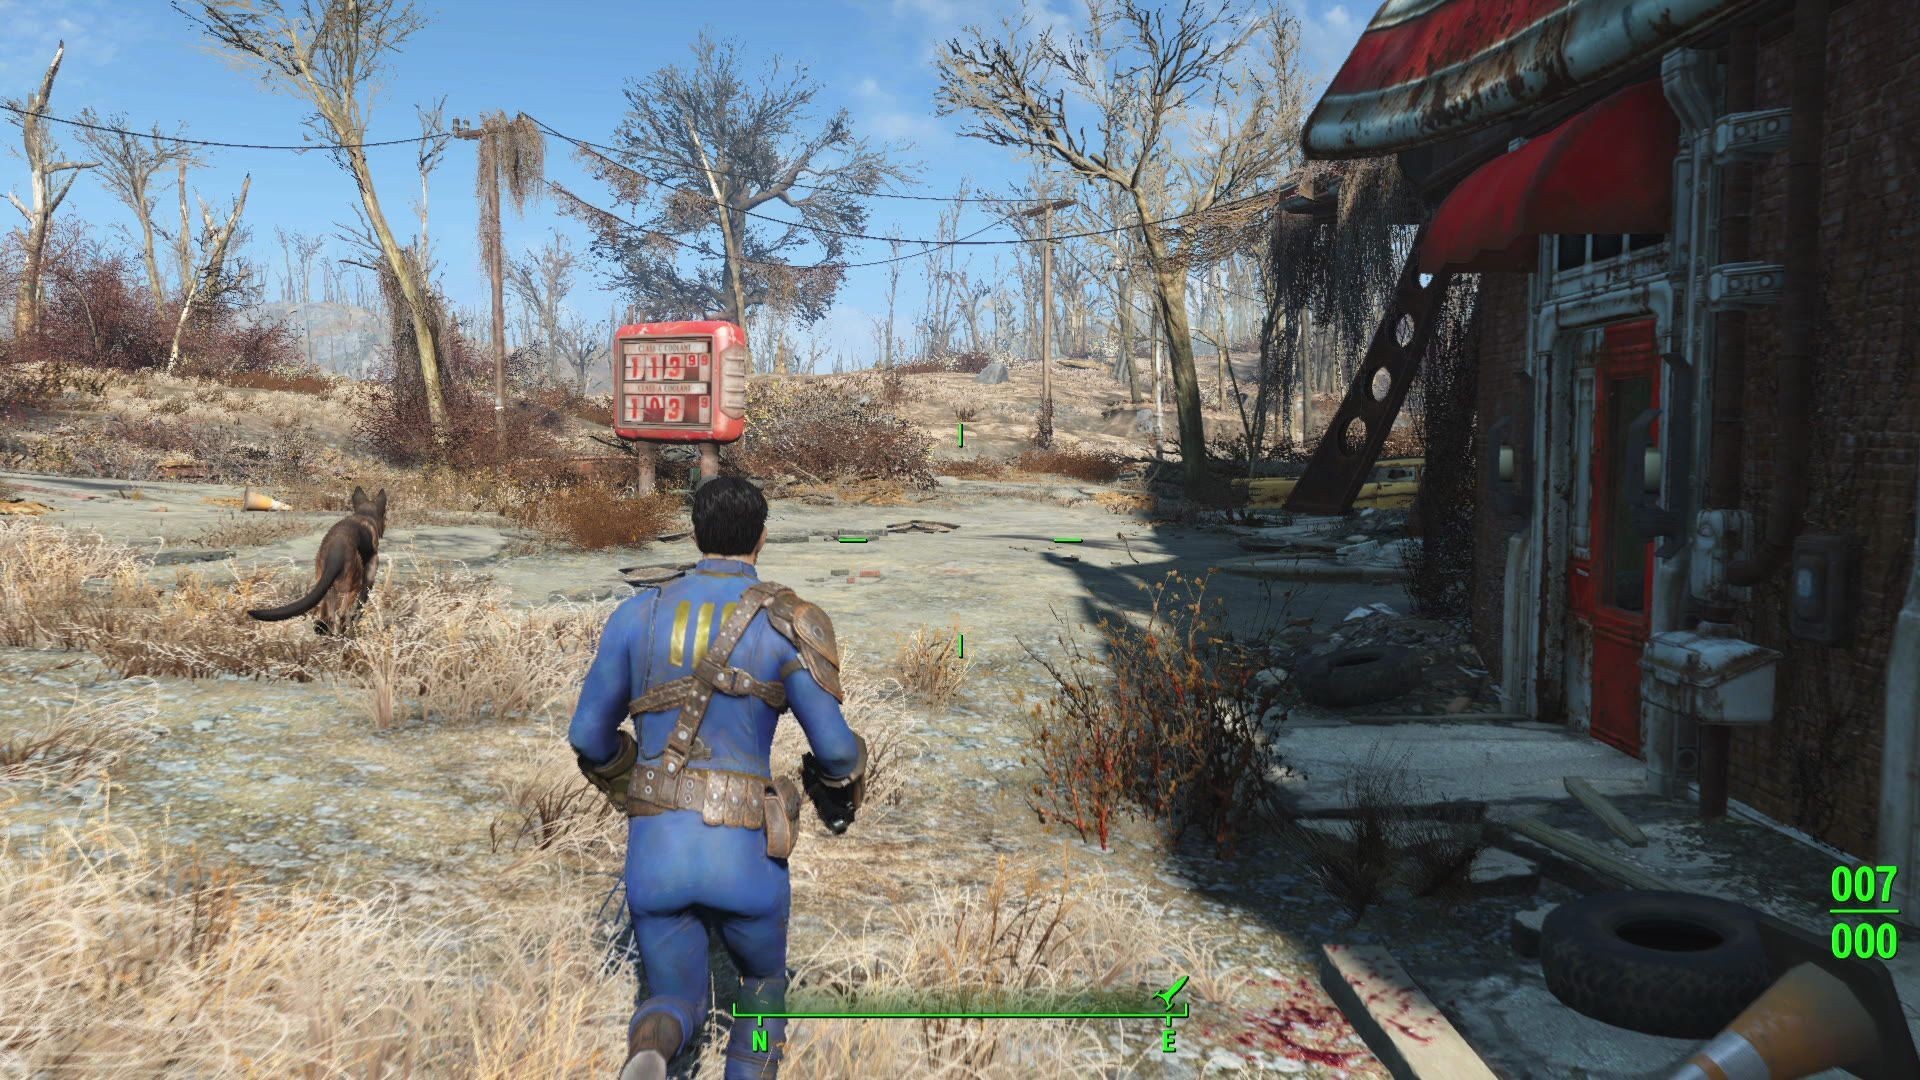 fallout 4 mods on steam